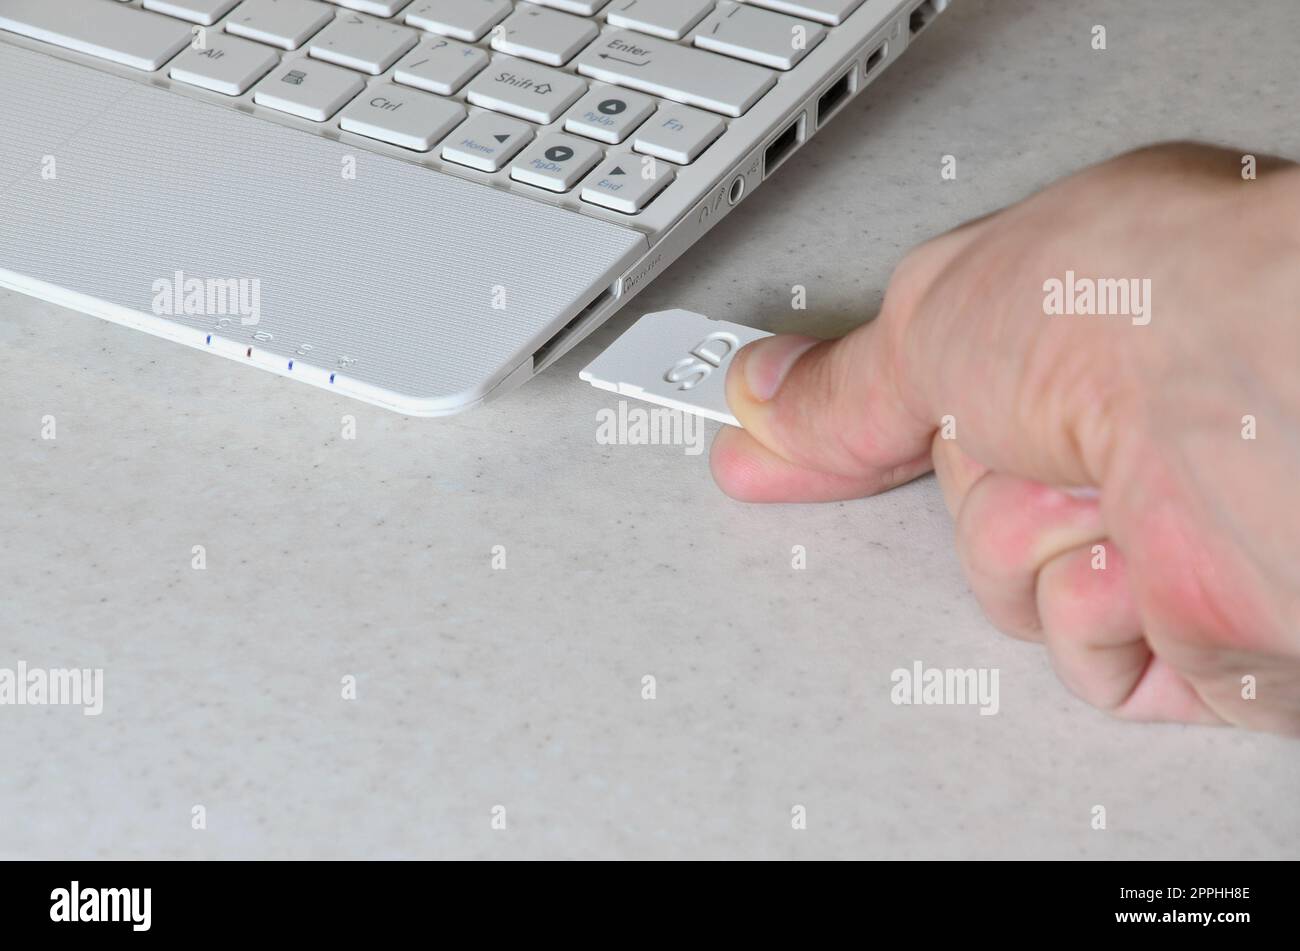 A male hand inserts a white compact SD card into the corresponding input in the side of the white netbook. Man uses modern technologies to store memory and digital data Stock Photo